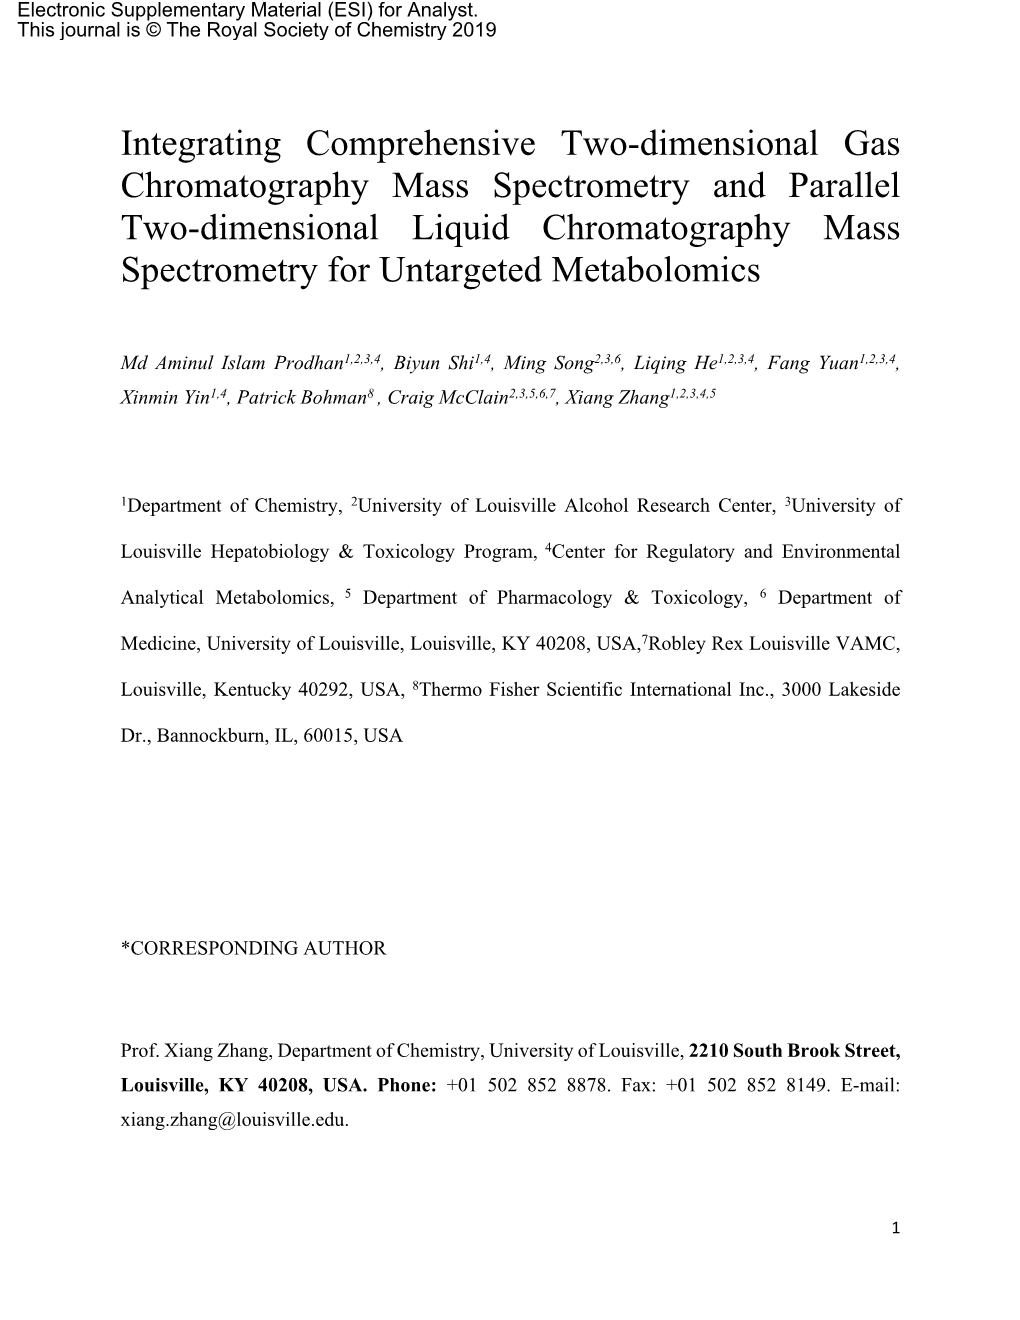 Integrating Comprehensive Two-Dimensional Gas Chromatography Mass Spectrometry and Parallel Two-Dimensional Liquid Chromatograph